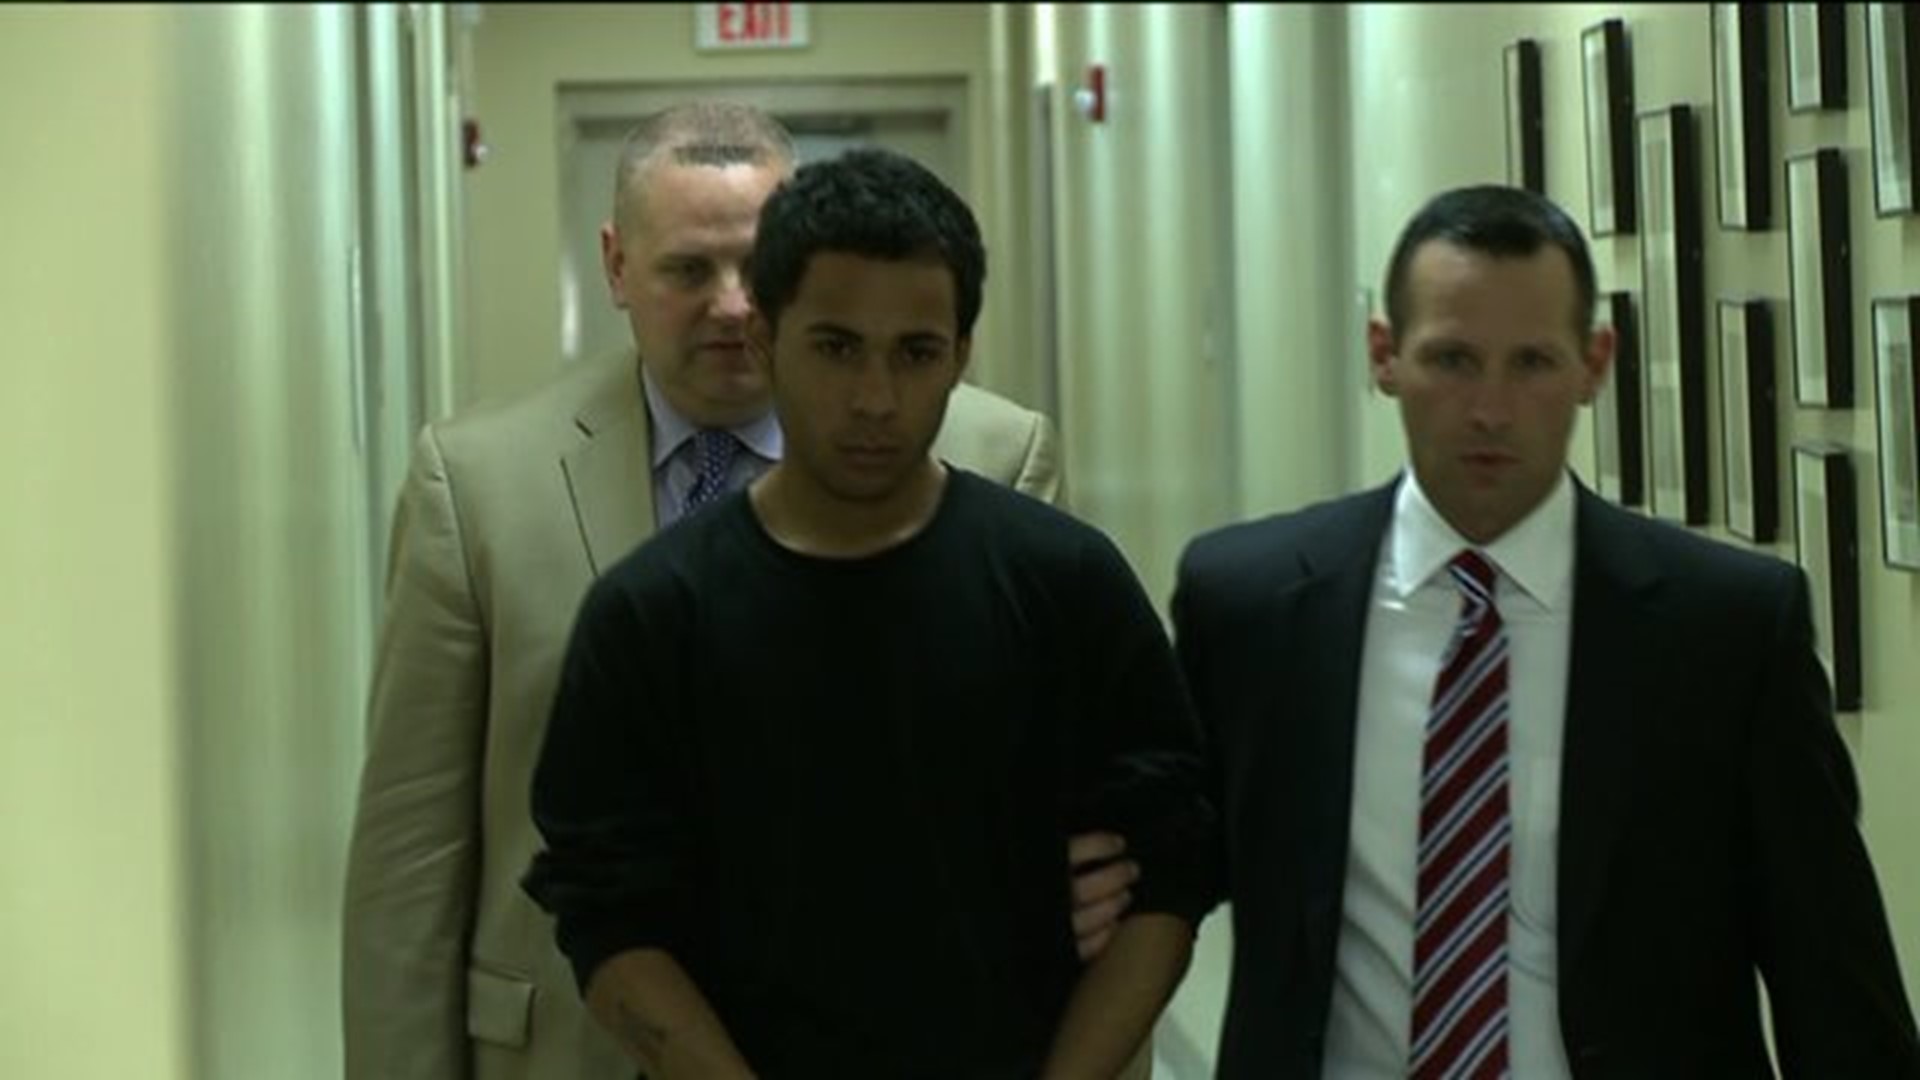 Second Suspect Pleads Guilty in Lackawanna College Student Killing